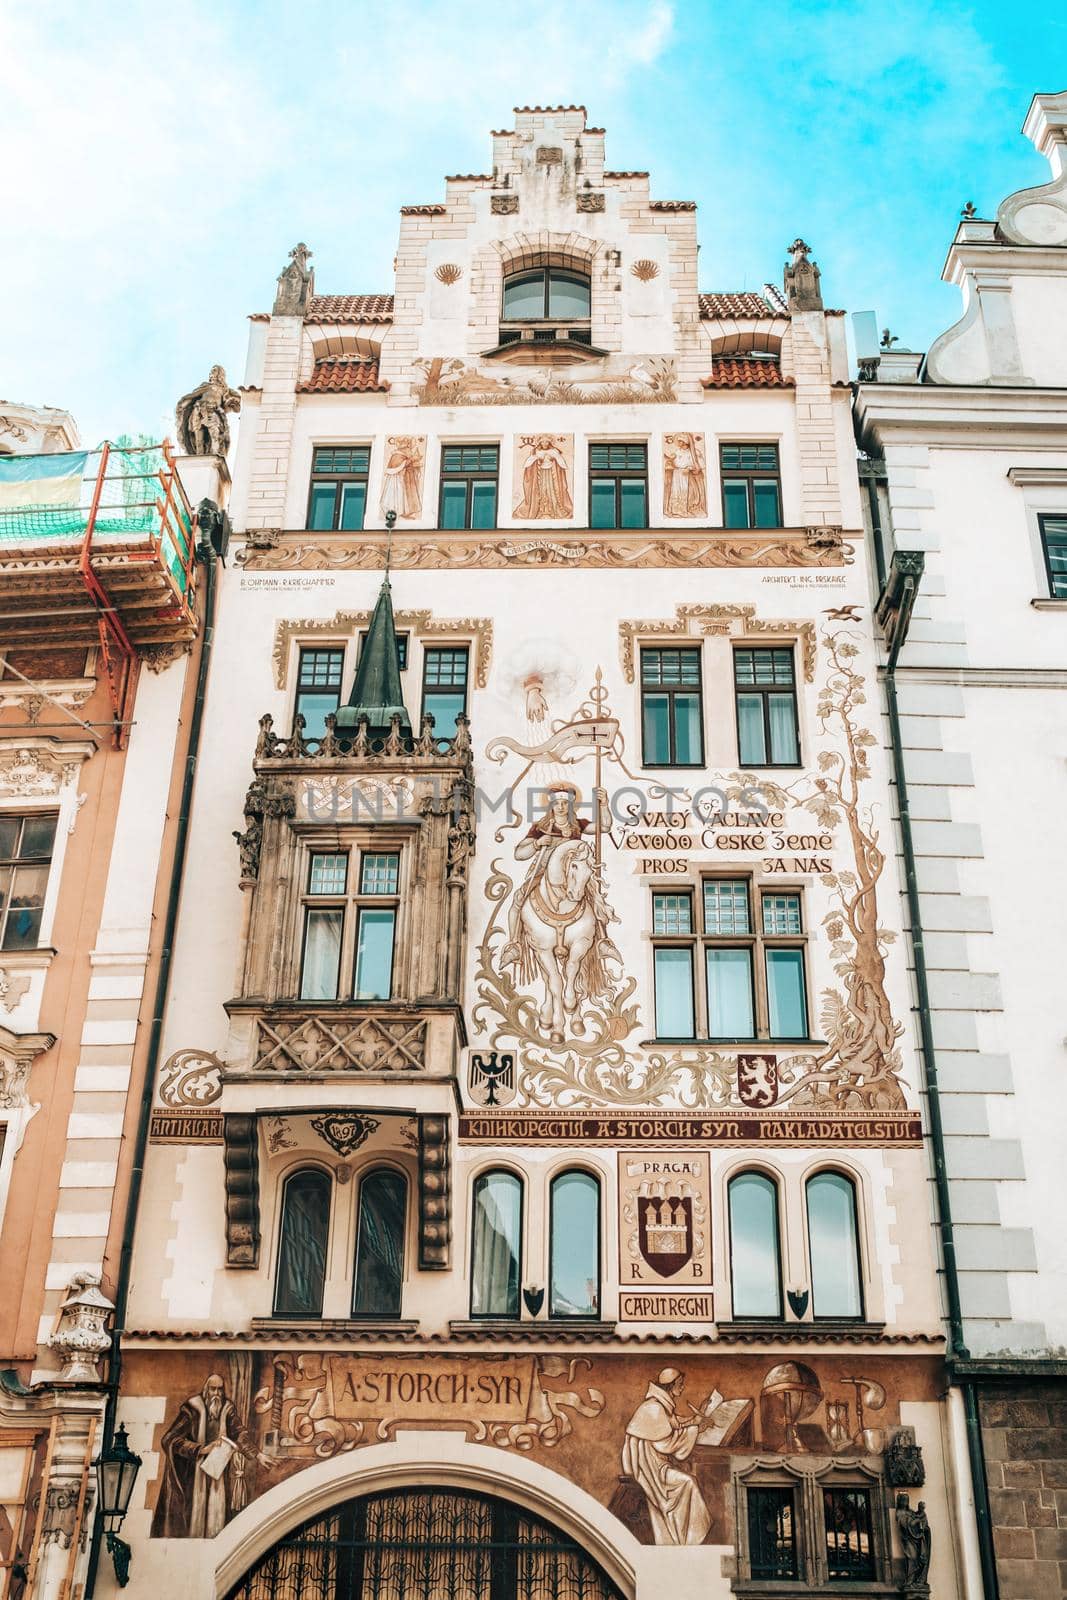 Prague, Czech Republic - July 2022. Facade of Storch House (Storchuv dum) publishing in Neo-Renaissance style. Balcony and decorated frescoes building in european capital,Old town square. High quality